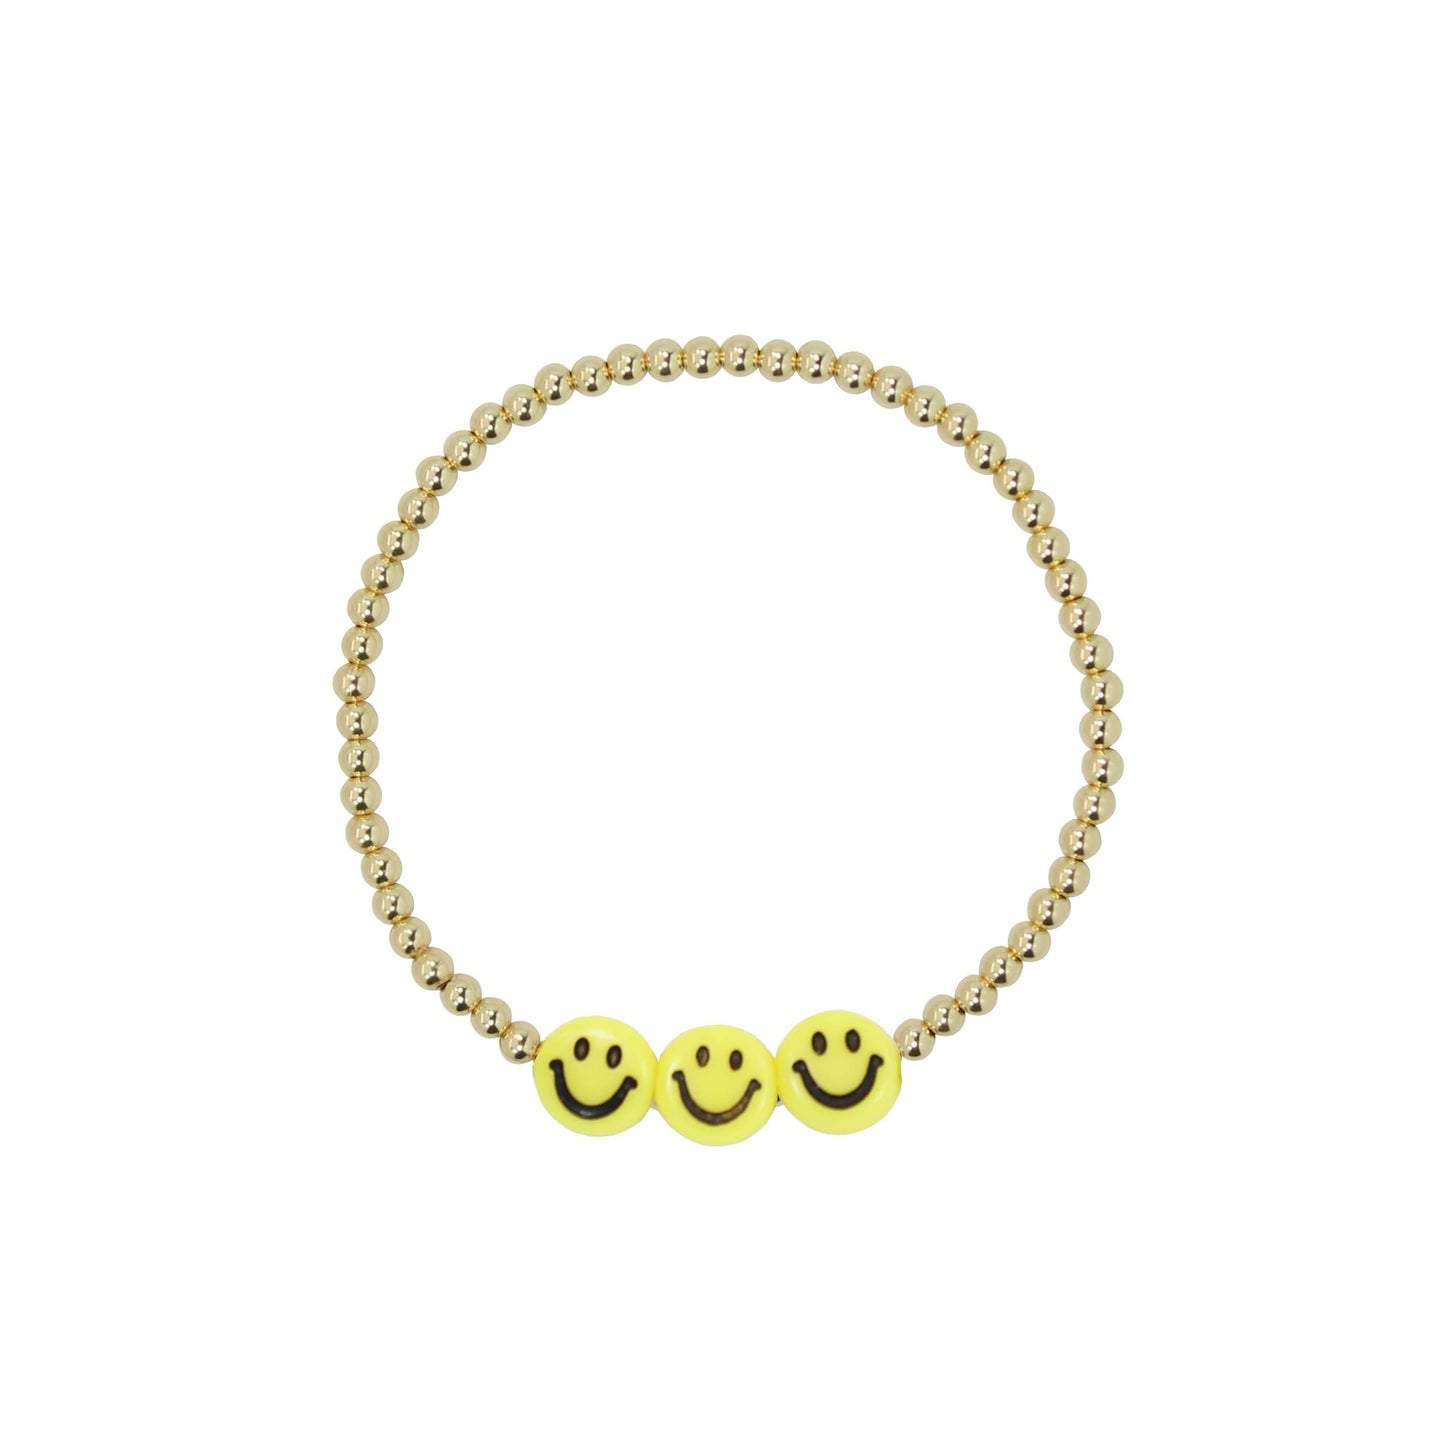 Stretchy Be Happy Adult Bracelet (3MM+6MM beads)